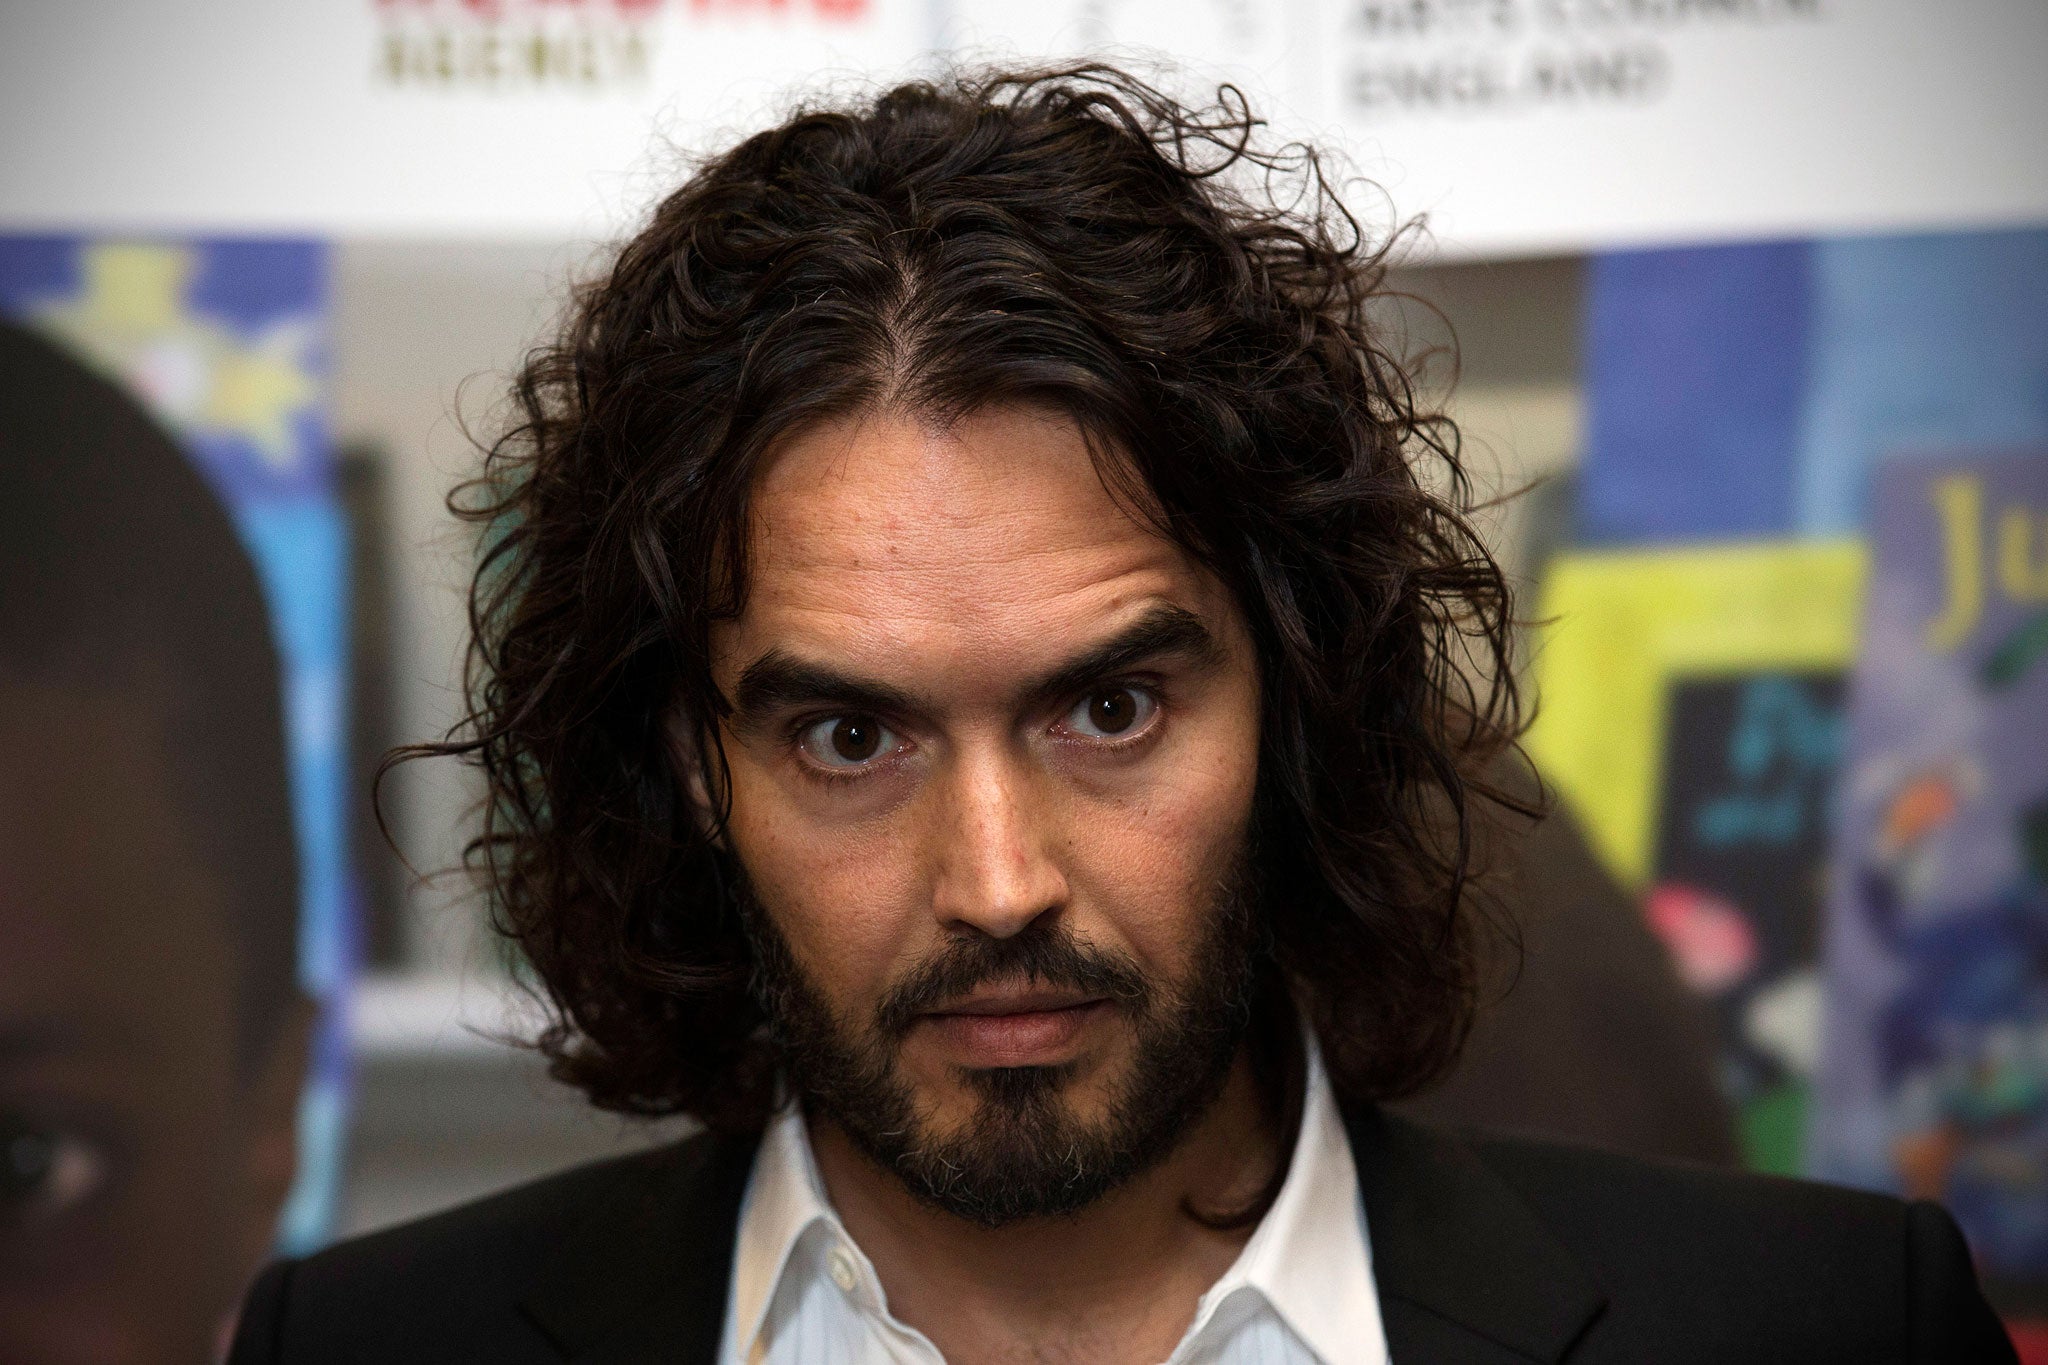 Any appearance by Russell Brand these days prompts one to accuse him of "sesquipedalian" talk (Getty)